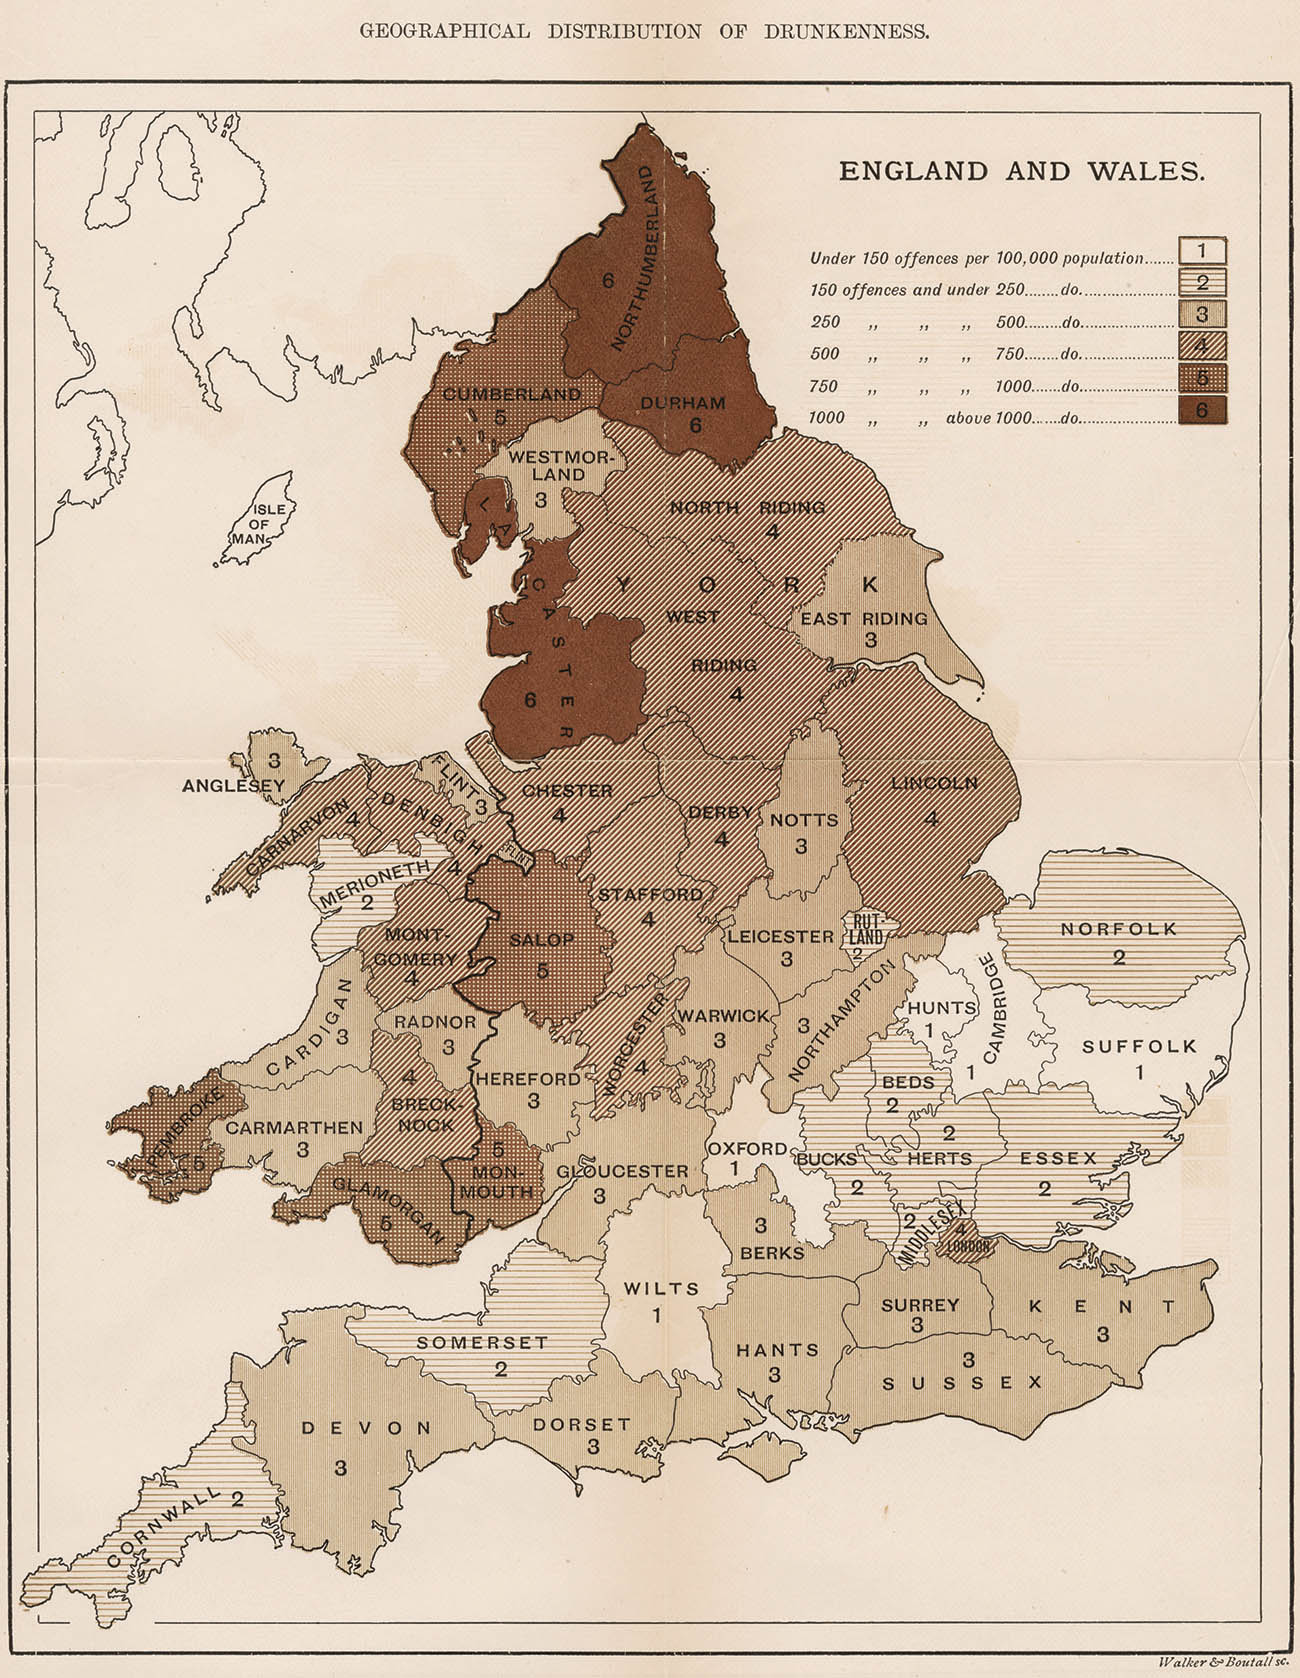 “Geographical Distribution of Drunkenness. England and Wales,” in J. Rowntree and A. Sherwell, “The Temperance Problem and Social Reform,” 1899.